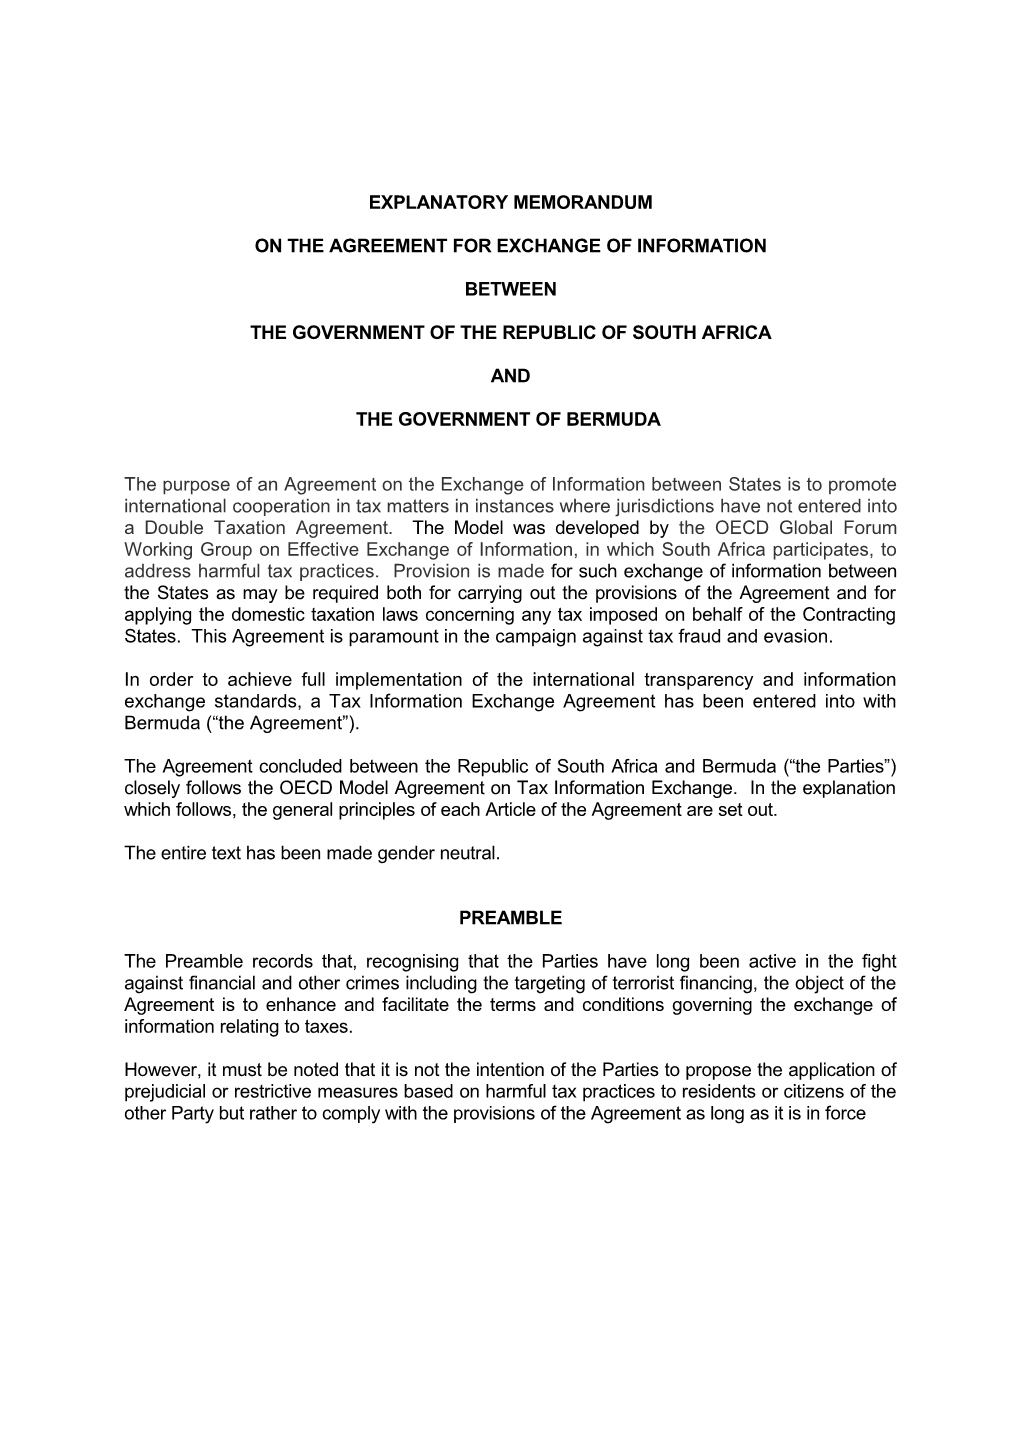 On the Agreement for Exchange of Information